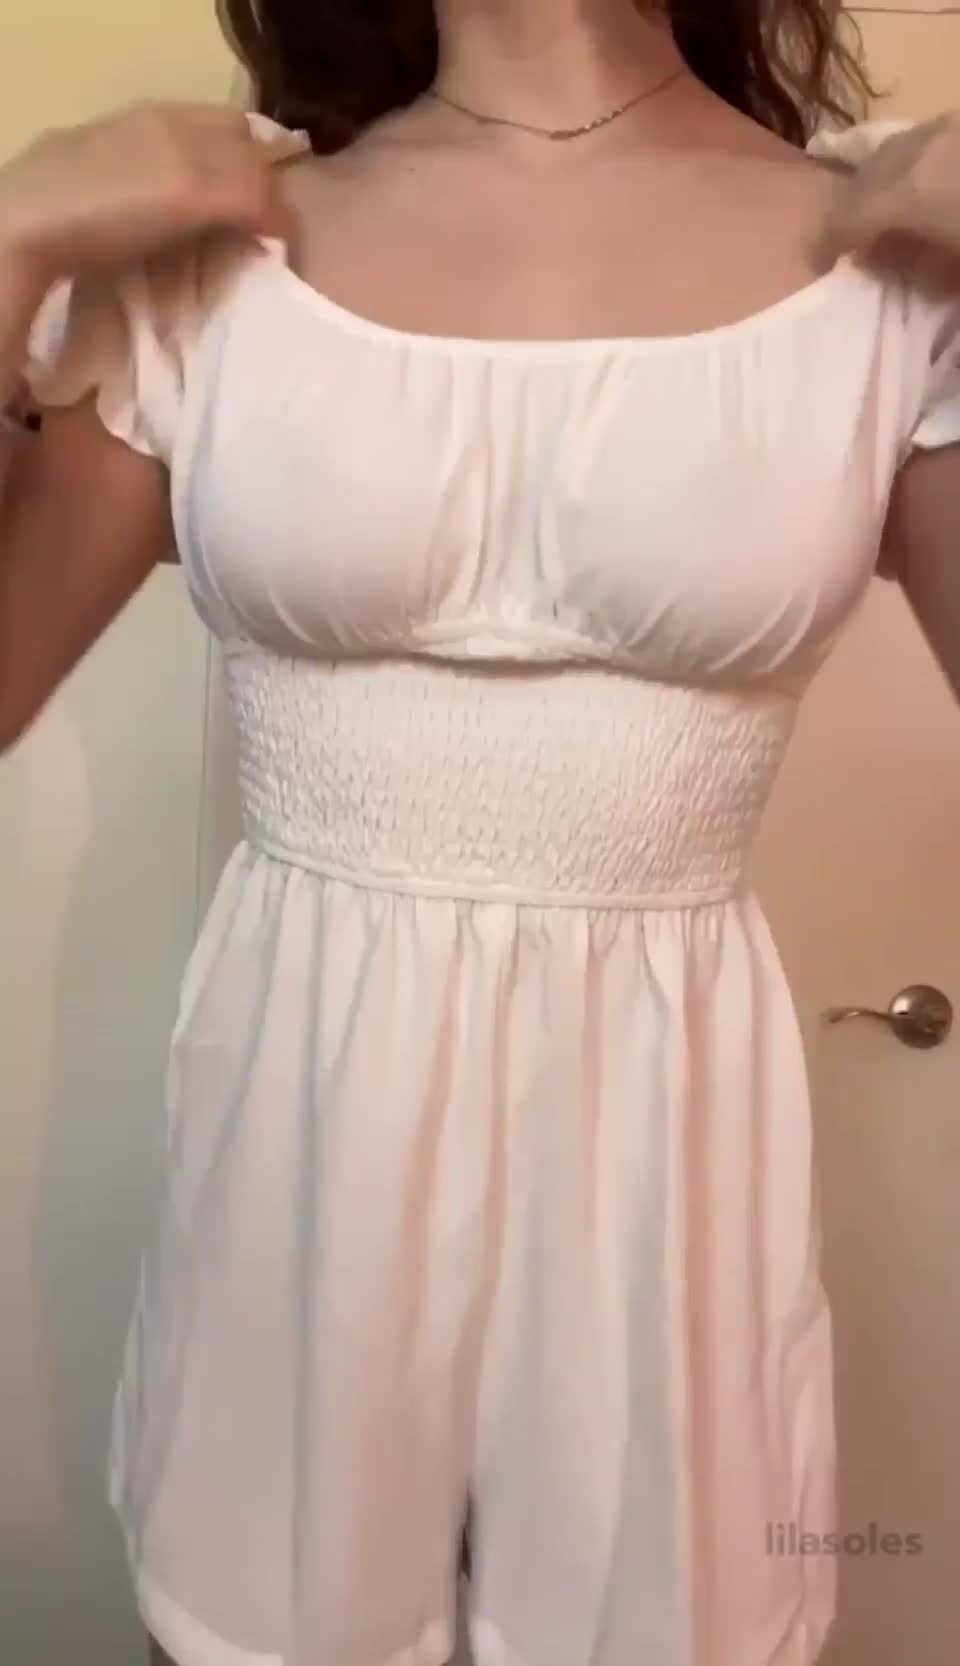 Video by polkj10 with the username @polkj10,  May 24, 2022 at 10:01 PM. The post is about the topic Busty Petite